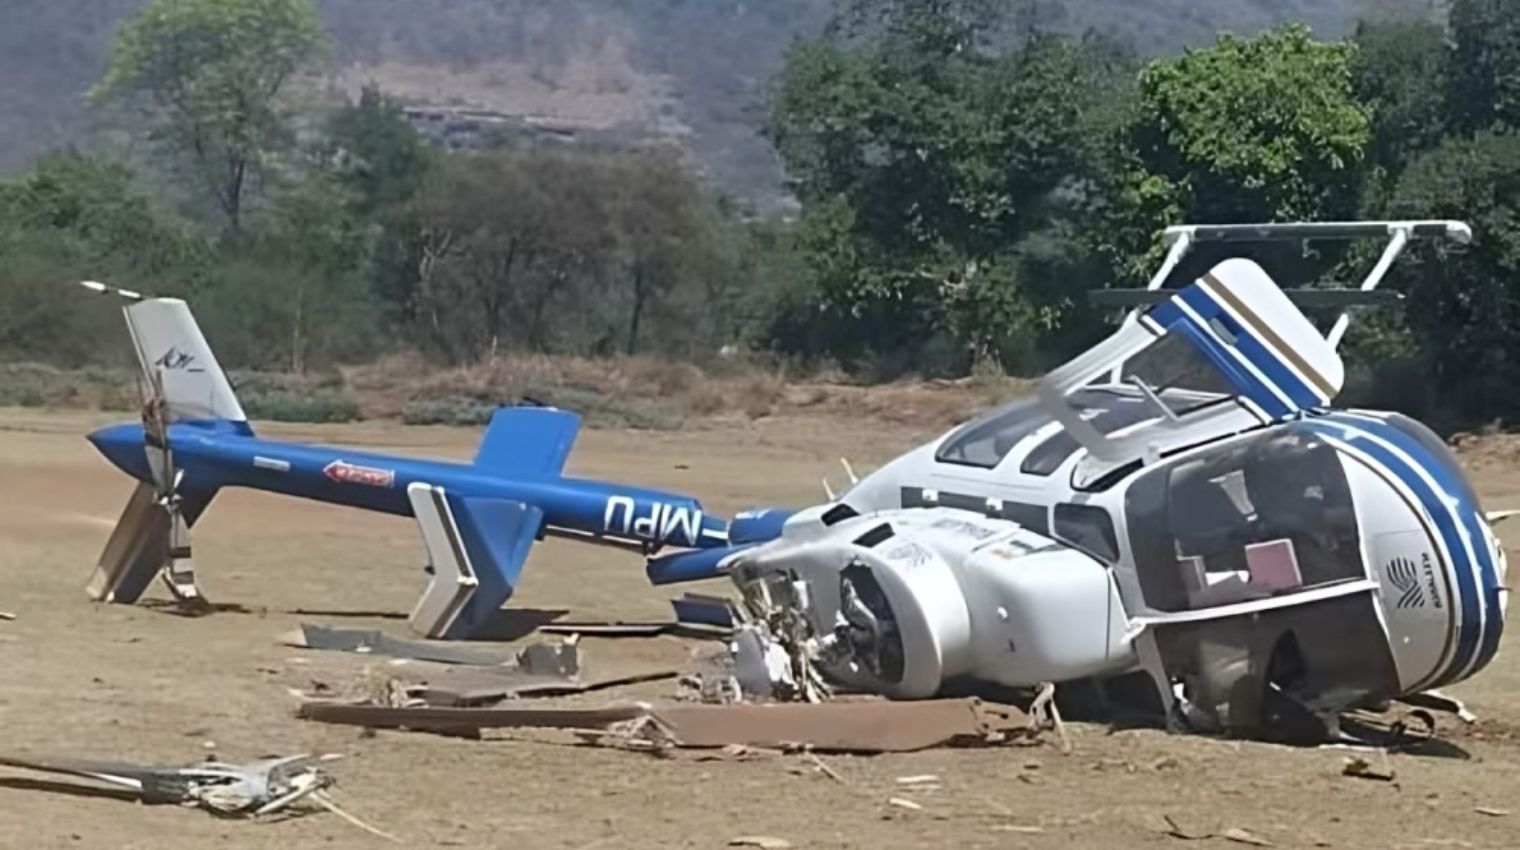 “Breaking: Helicopter En Route to Pick Up Shiv Sena Leader Crashes in Raigad; Pilot Injured “